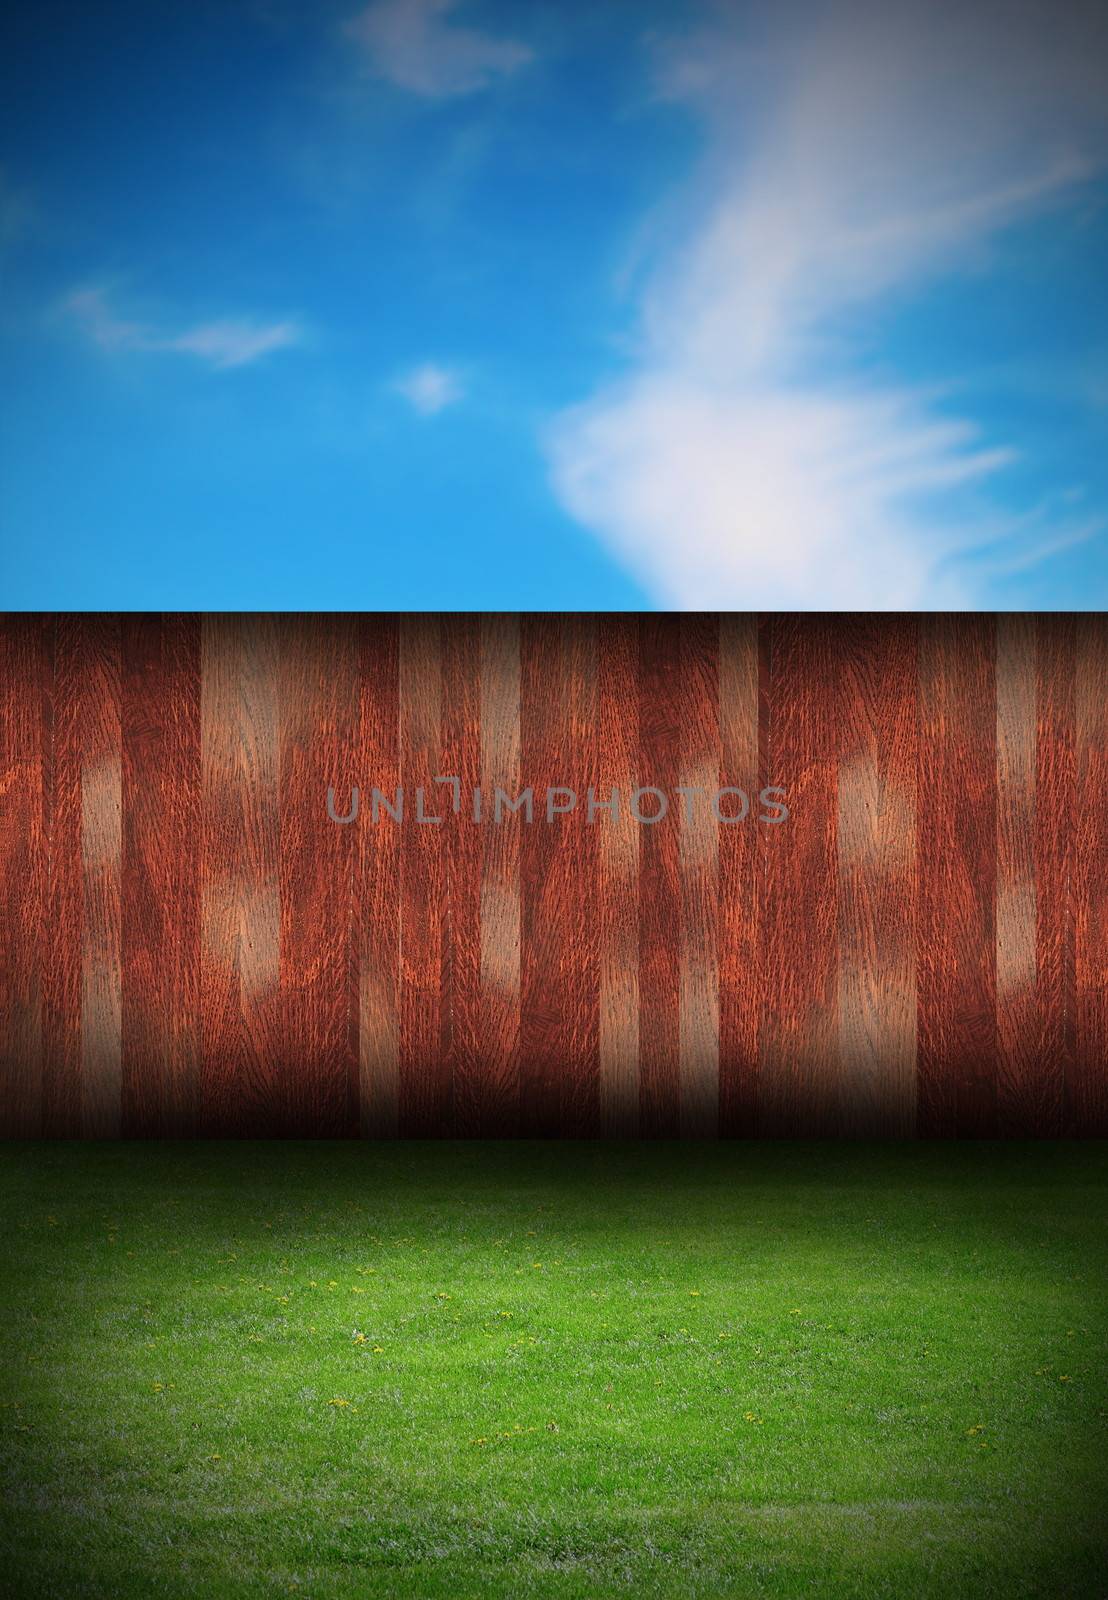 abstract backyard with wood fence by taviphoto